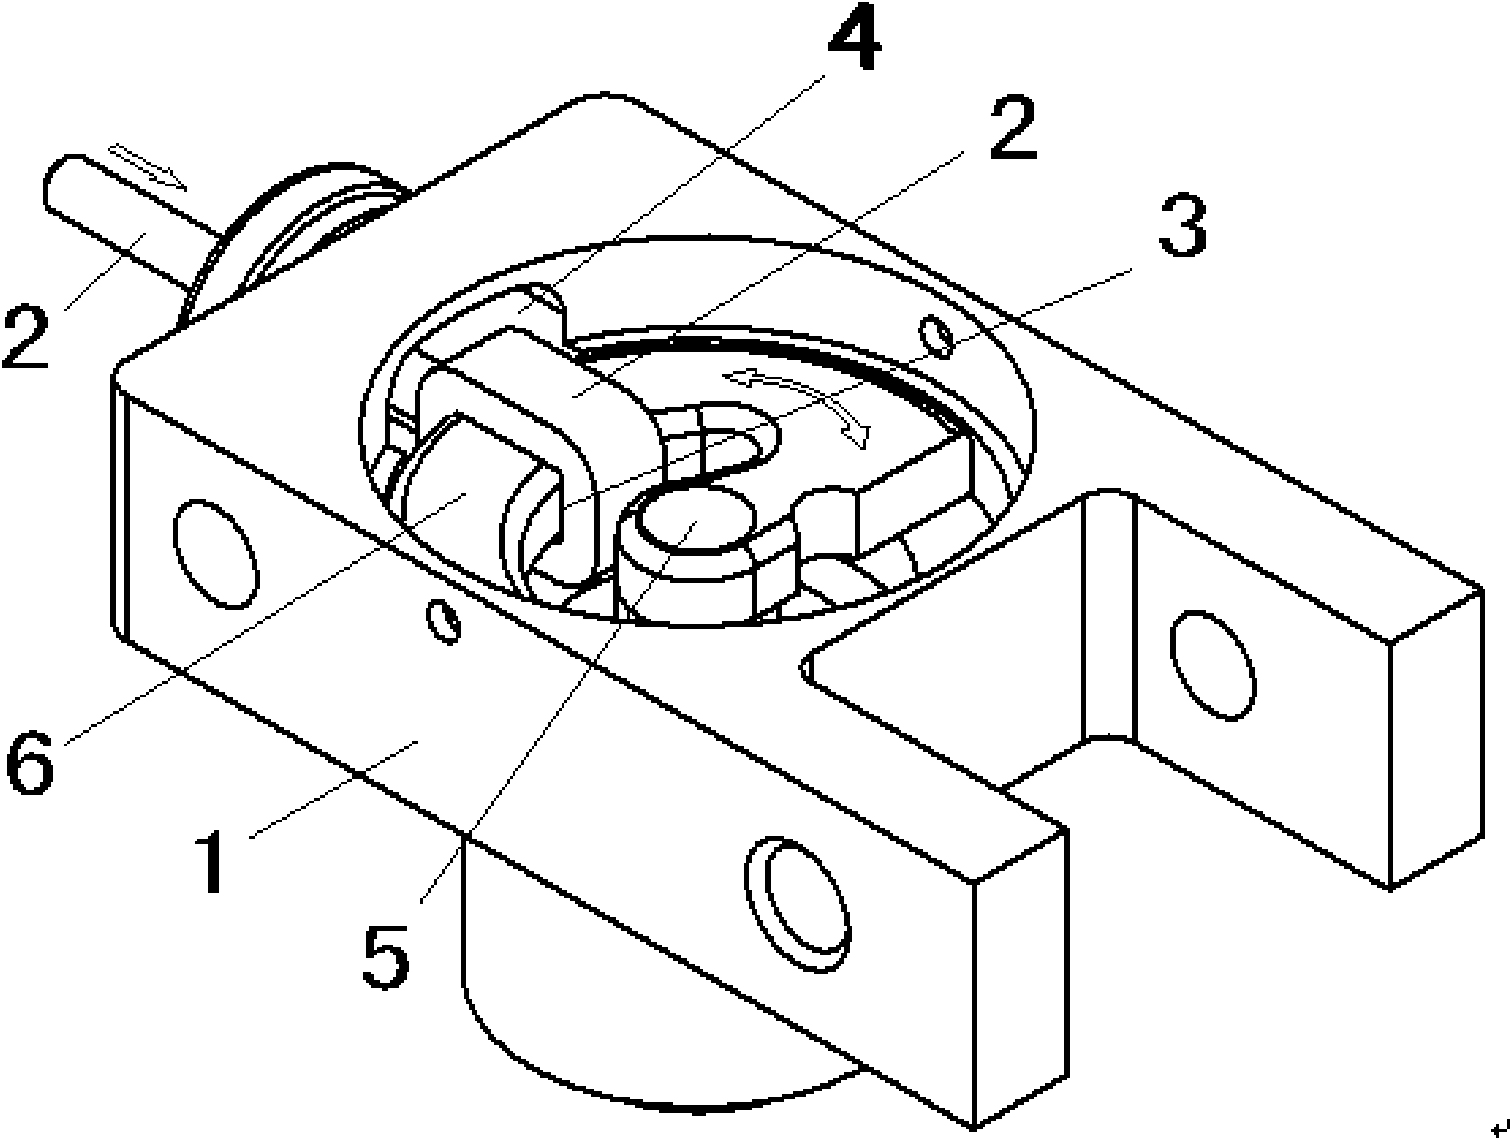 Method for rapidly disassembling radome on airplane and rotating locks